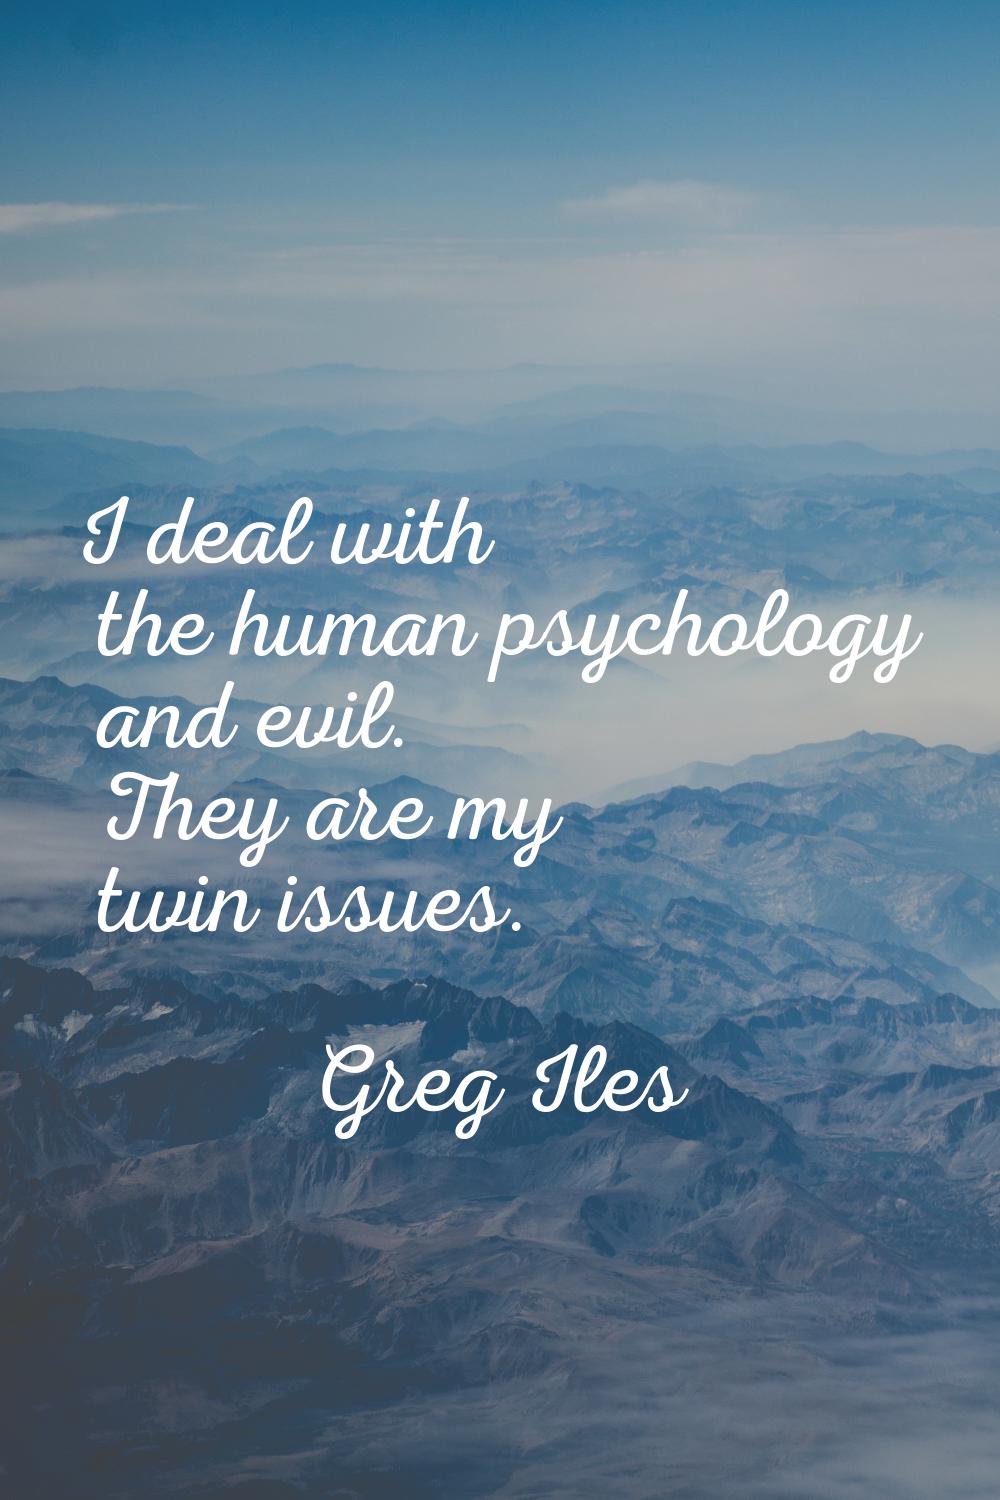 I deal with the human psychology and evil. They are my twin issues.